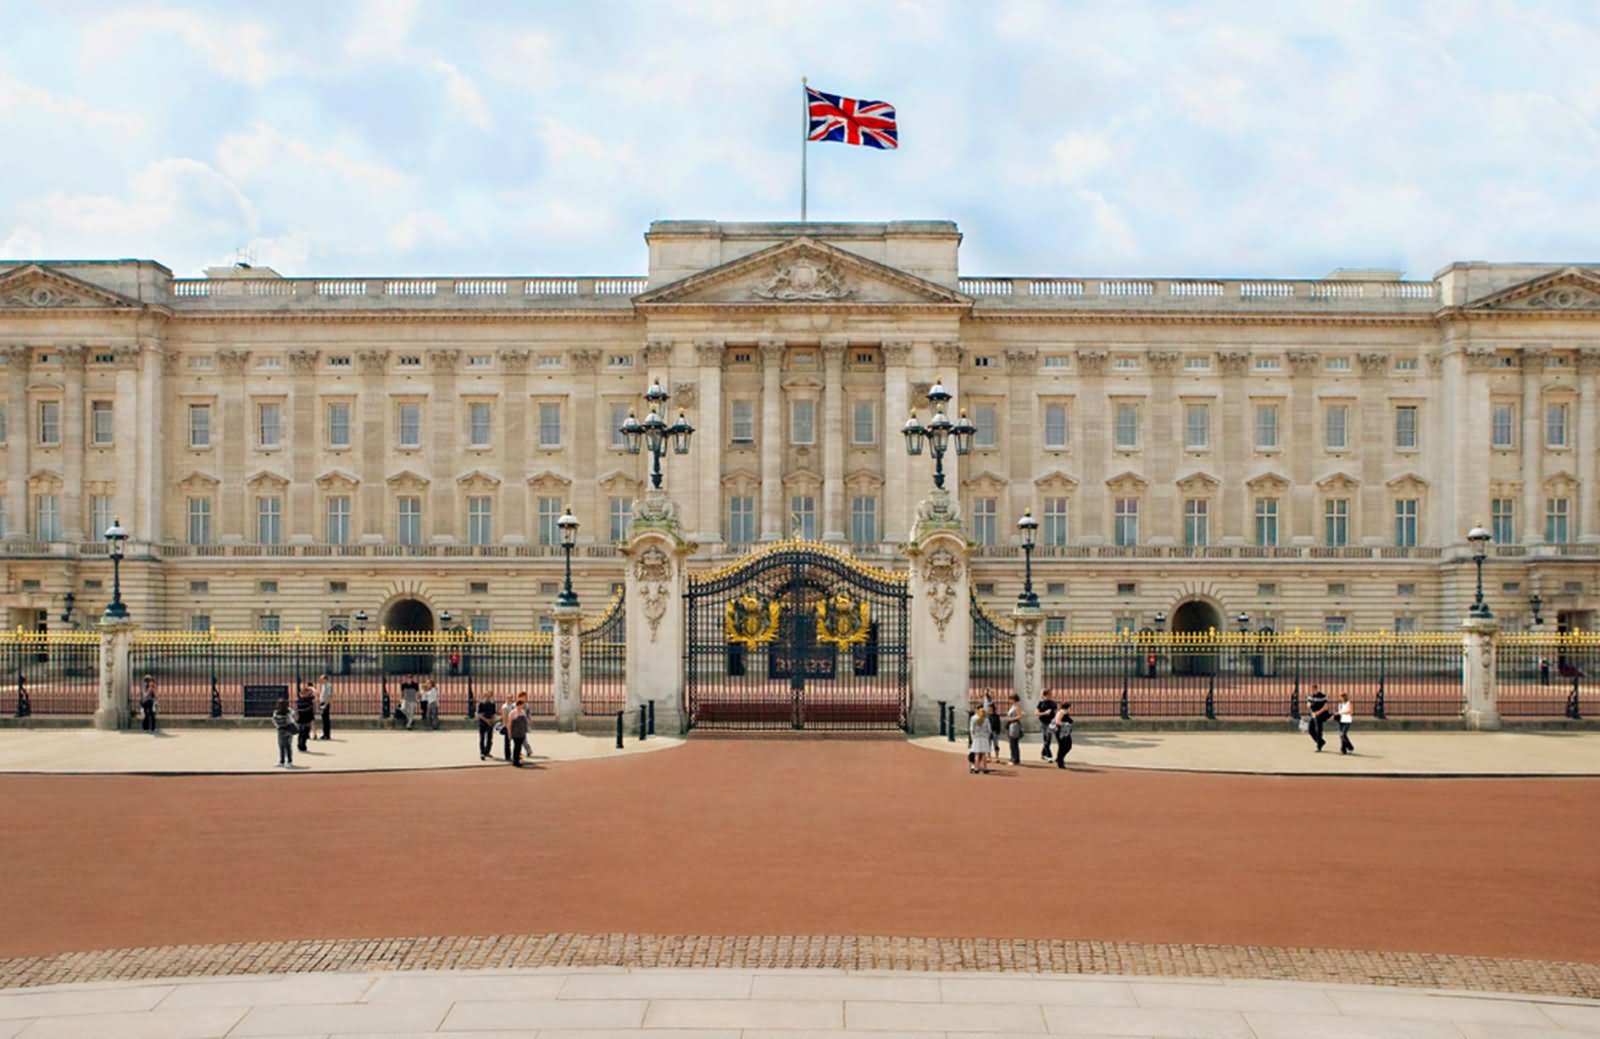 Beautiful Picture Of The Buckingham Palace